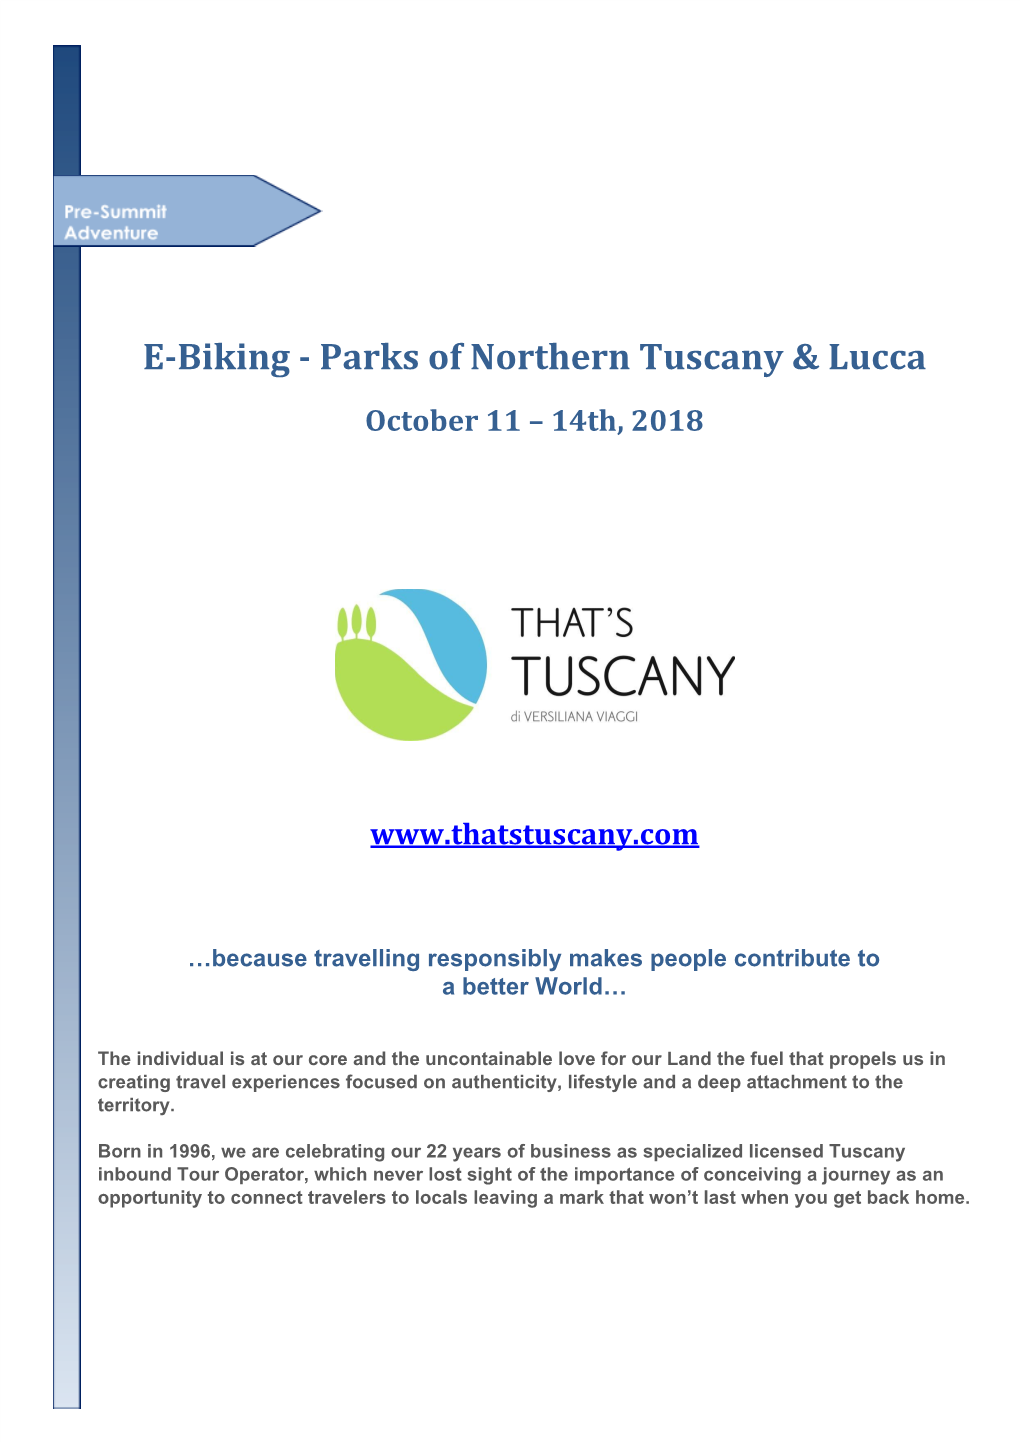 E-Biking - Parks of Northern Tuscany & Lucca